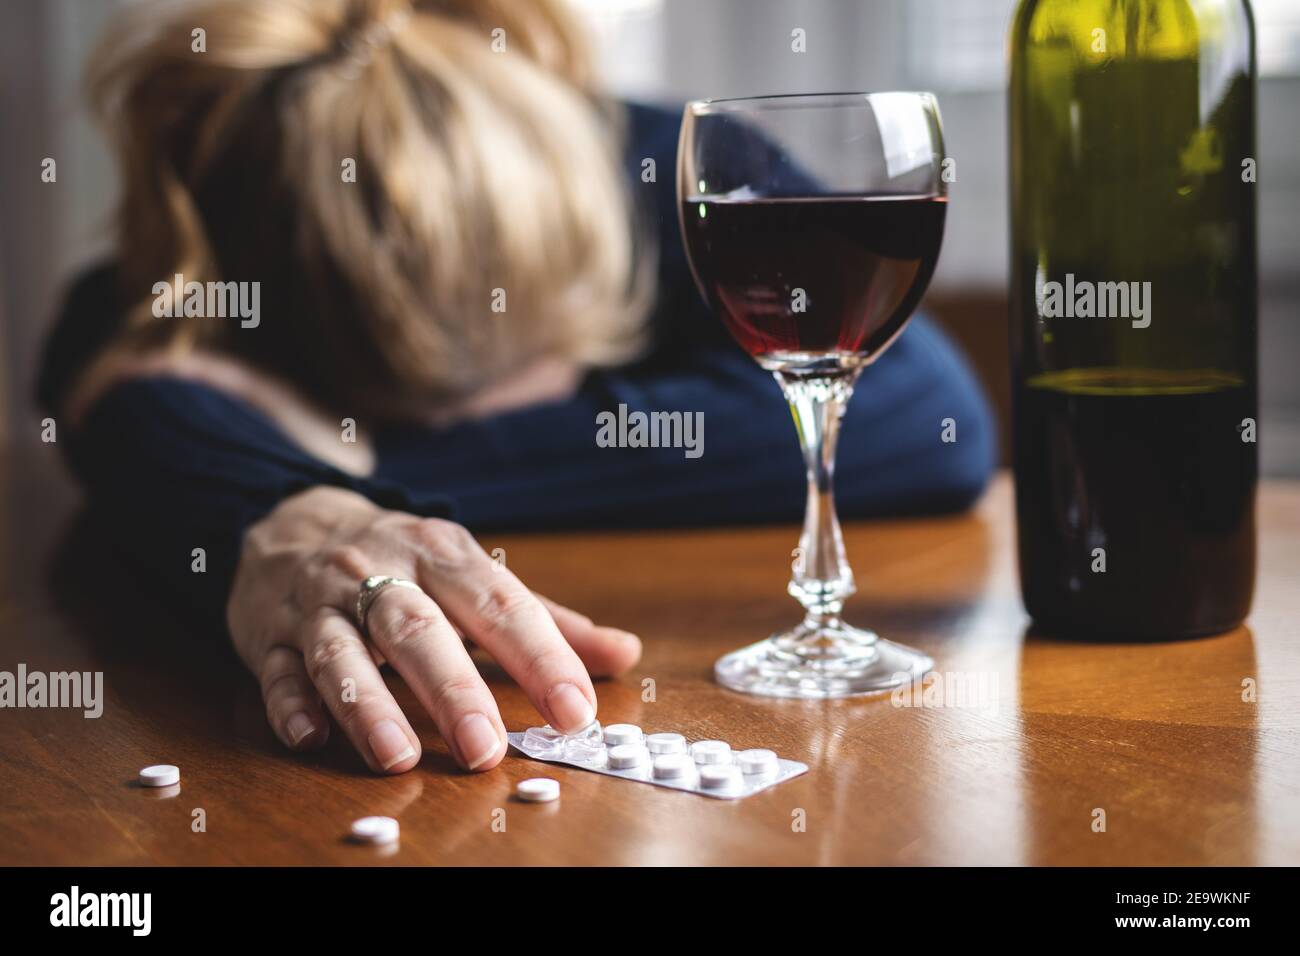 Woman after drug overdose and drinking red wine. Drugs and alcohol addiction social issues. Drunk female at home alone. Alcoholism concept Stock Photo